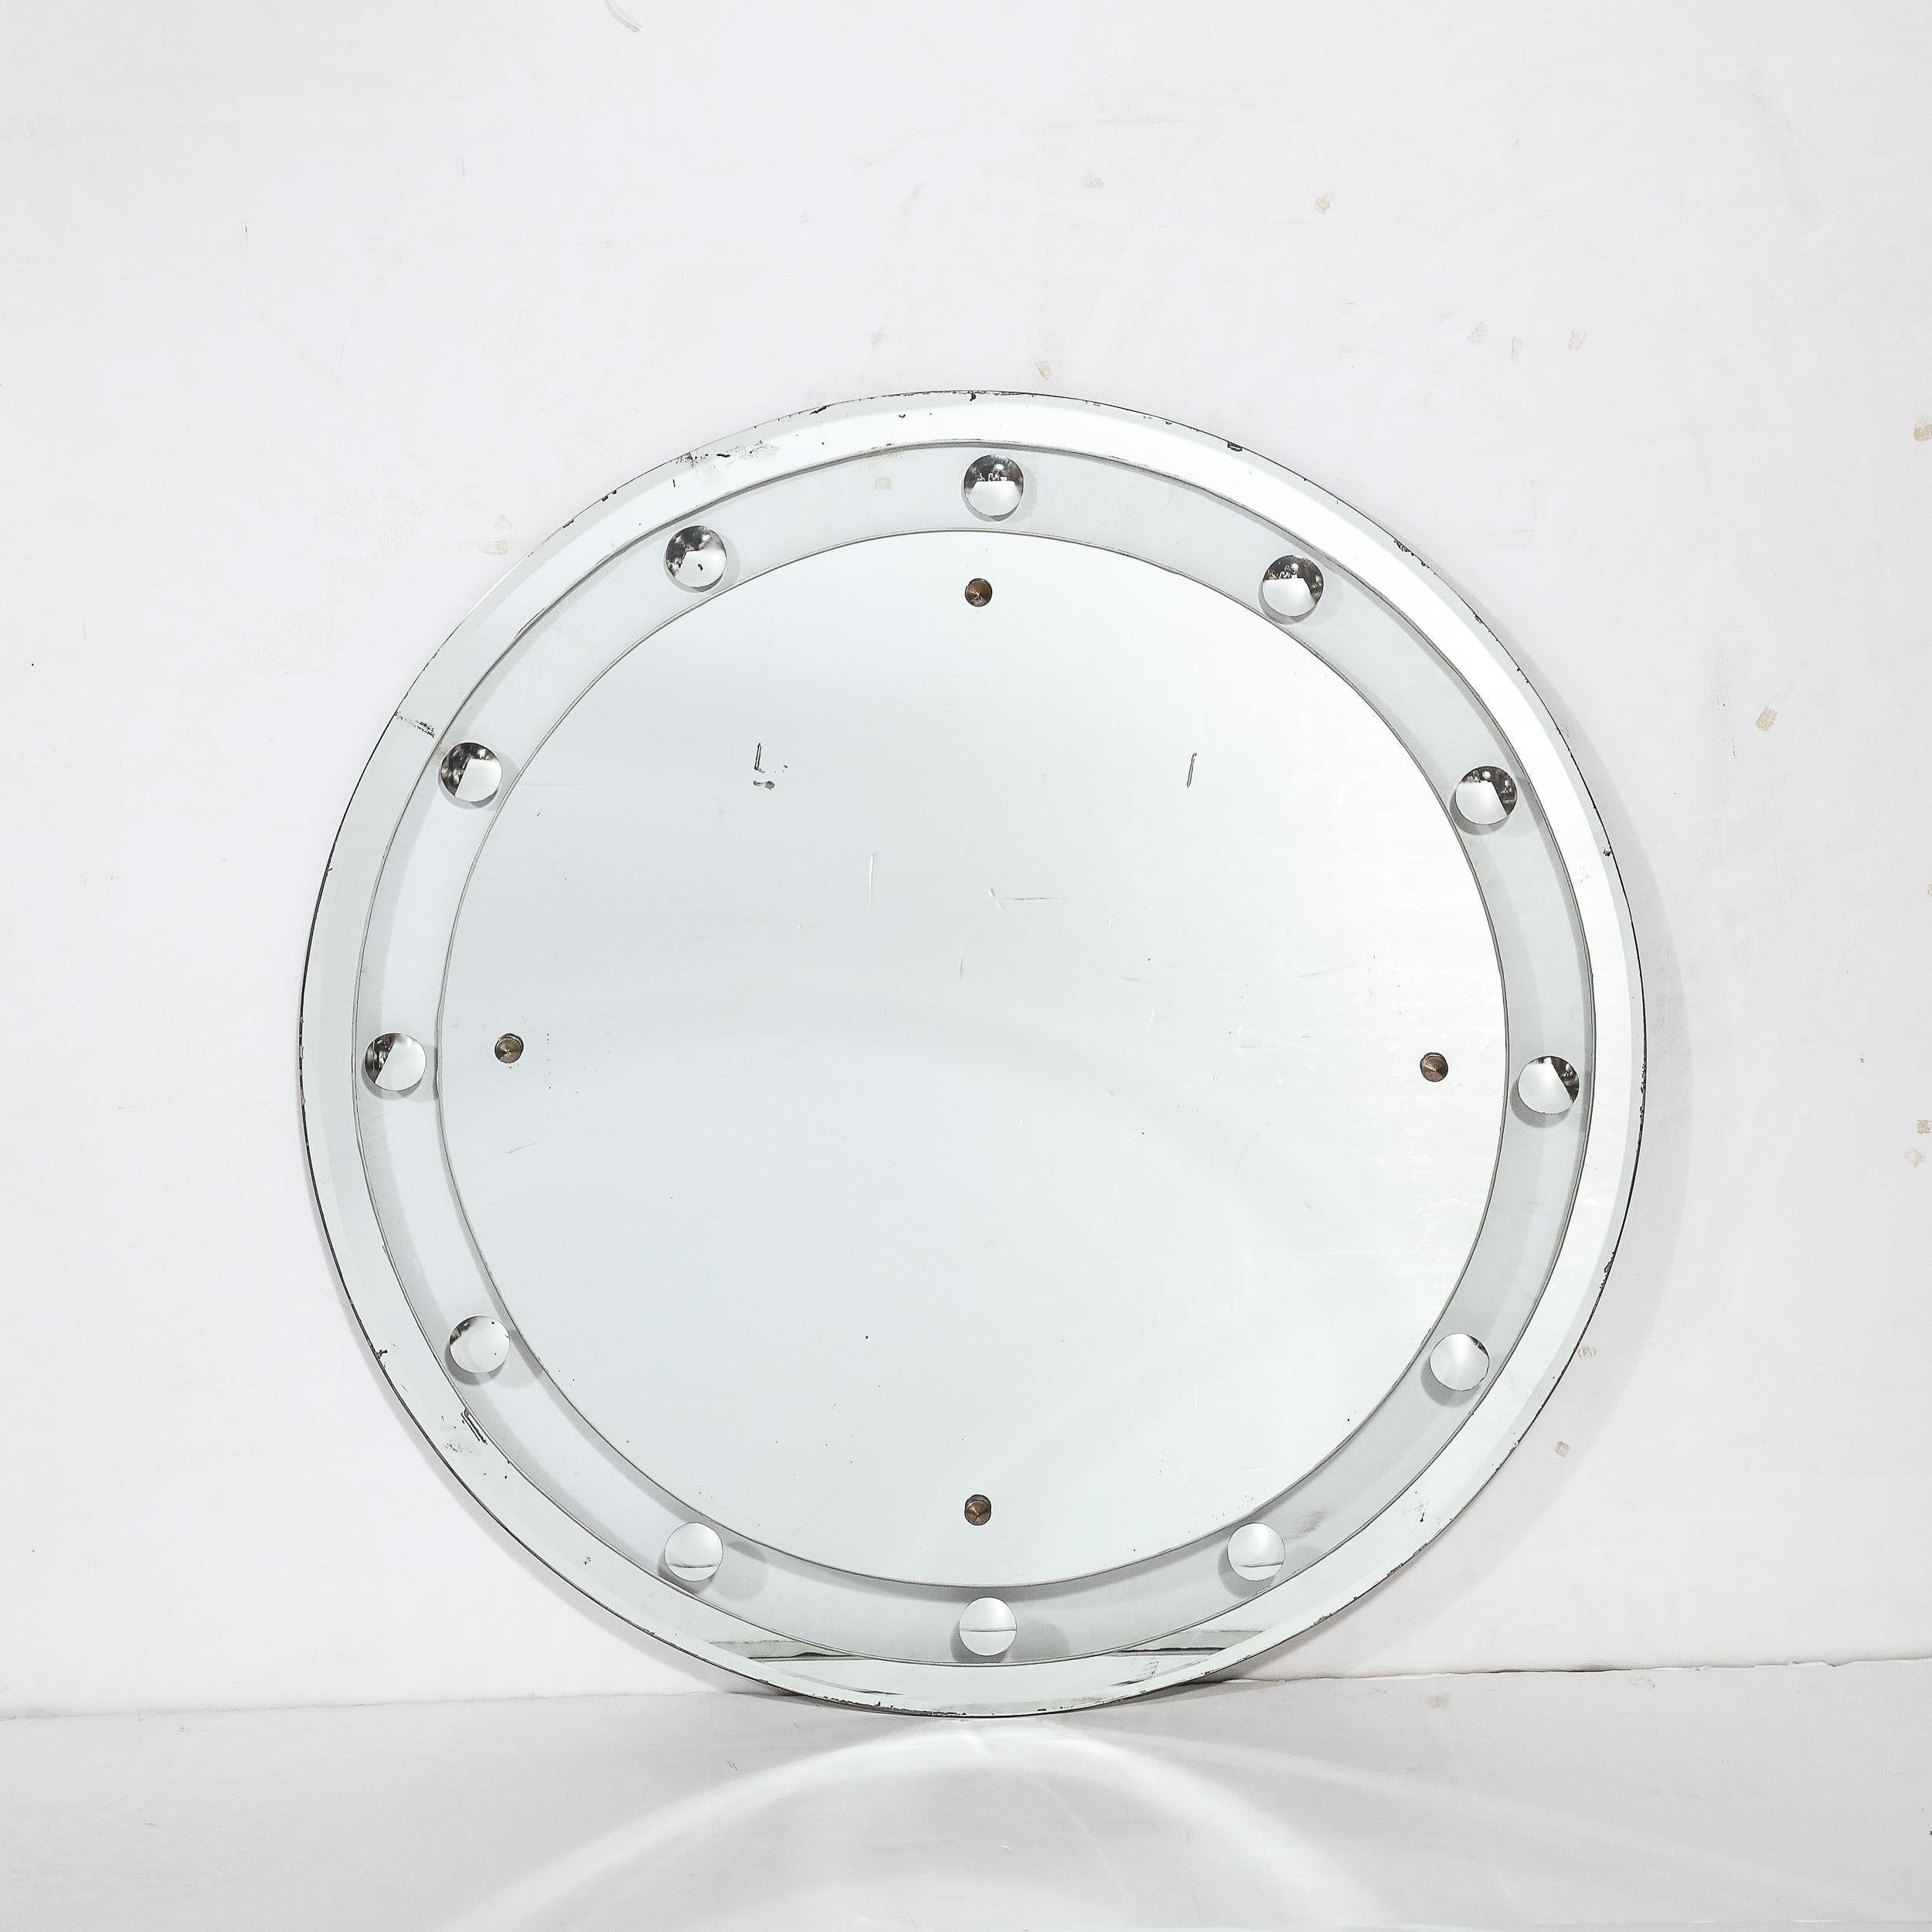 This stunning Art Deco floating edge round mirror was realized in the United States circa 1930. It offers a circular form with two banded layers of mirror circumscribing the perimeter of the central plain round mirror. The innermost band offers